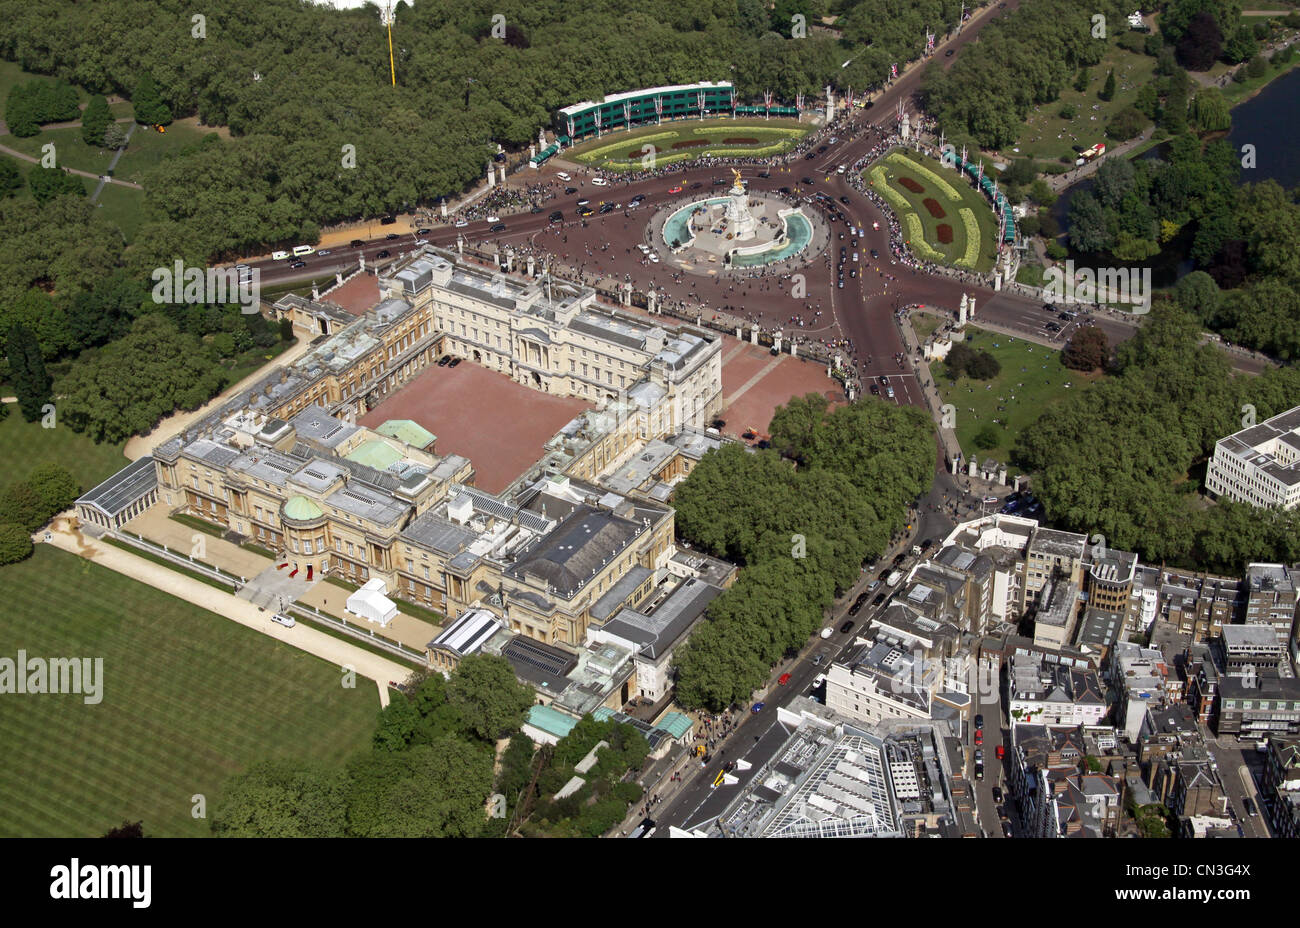 aerial view of Buckingham Palace, the Queen's residence, London, UK Stock Photo